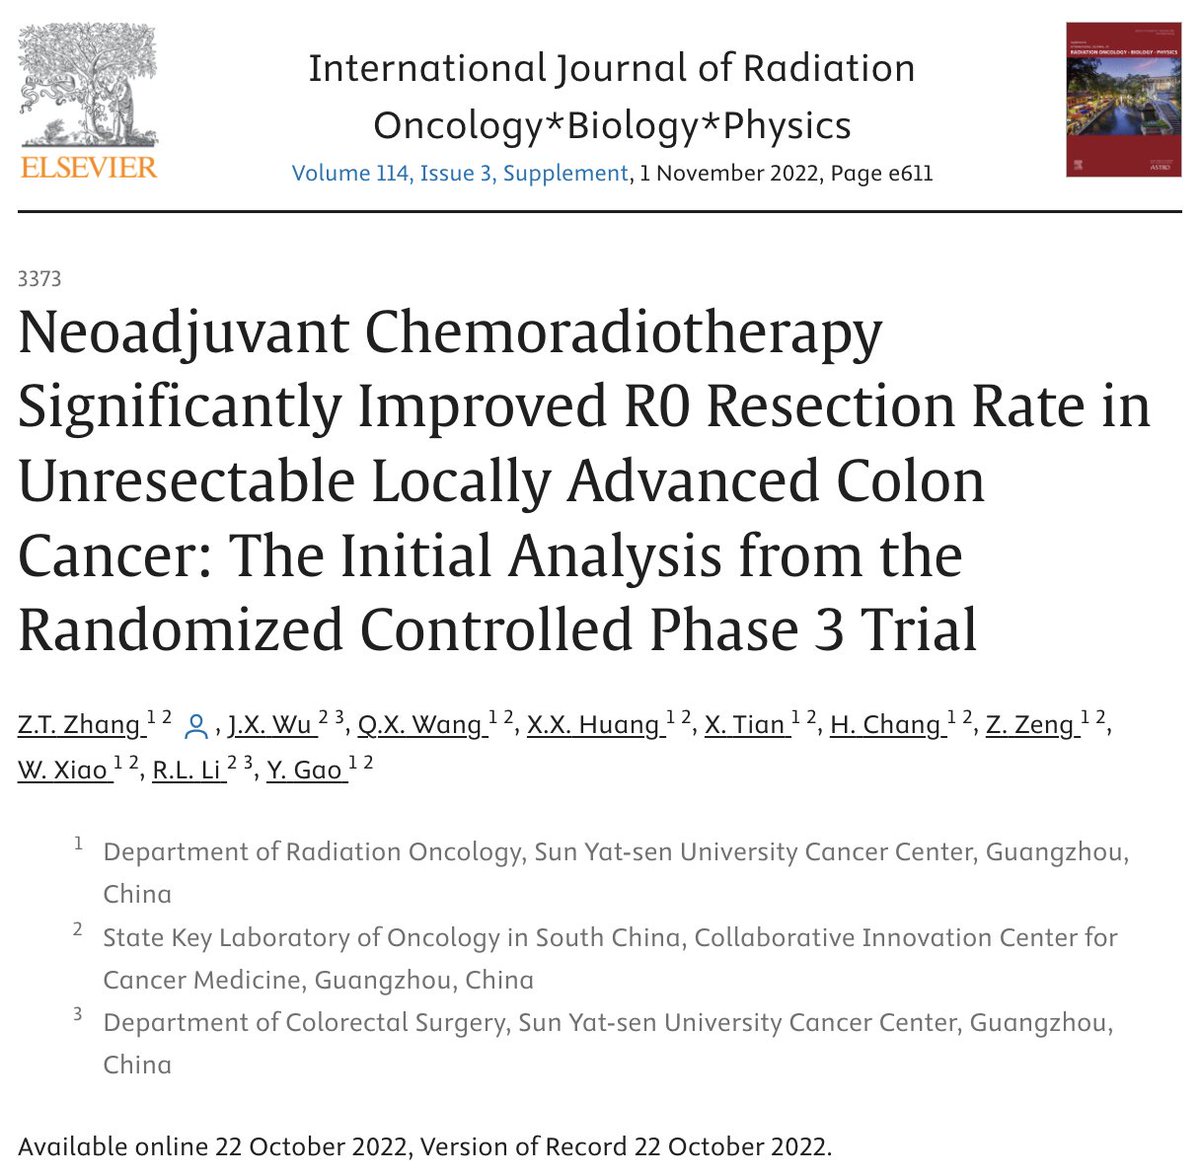 @DrNarendran82 @FabArcidiacono8 @DrewMoghanaki @ldawsonmd @MikeChuongMD @_ShankarSiva @CancerConnector @NCCN Check out this study suggesting improved overall survival with NACCRT for initially unresectable, non-metastatic locally advanced CRC: 🔬 Conversion to resectability: 20% to 84% 🔬 R0 resection rate: 20% to 80% 🔬 2-year PFS: 37% to 72% 🔬 2-year OS: 73% to 96% 🔬 No…